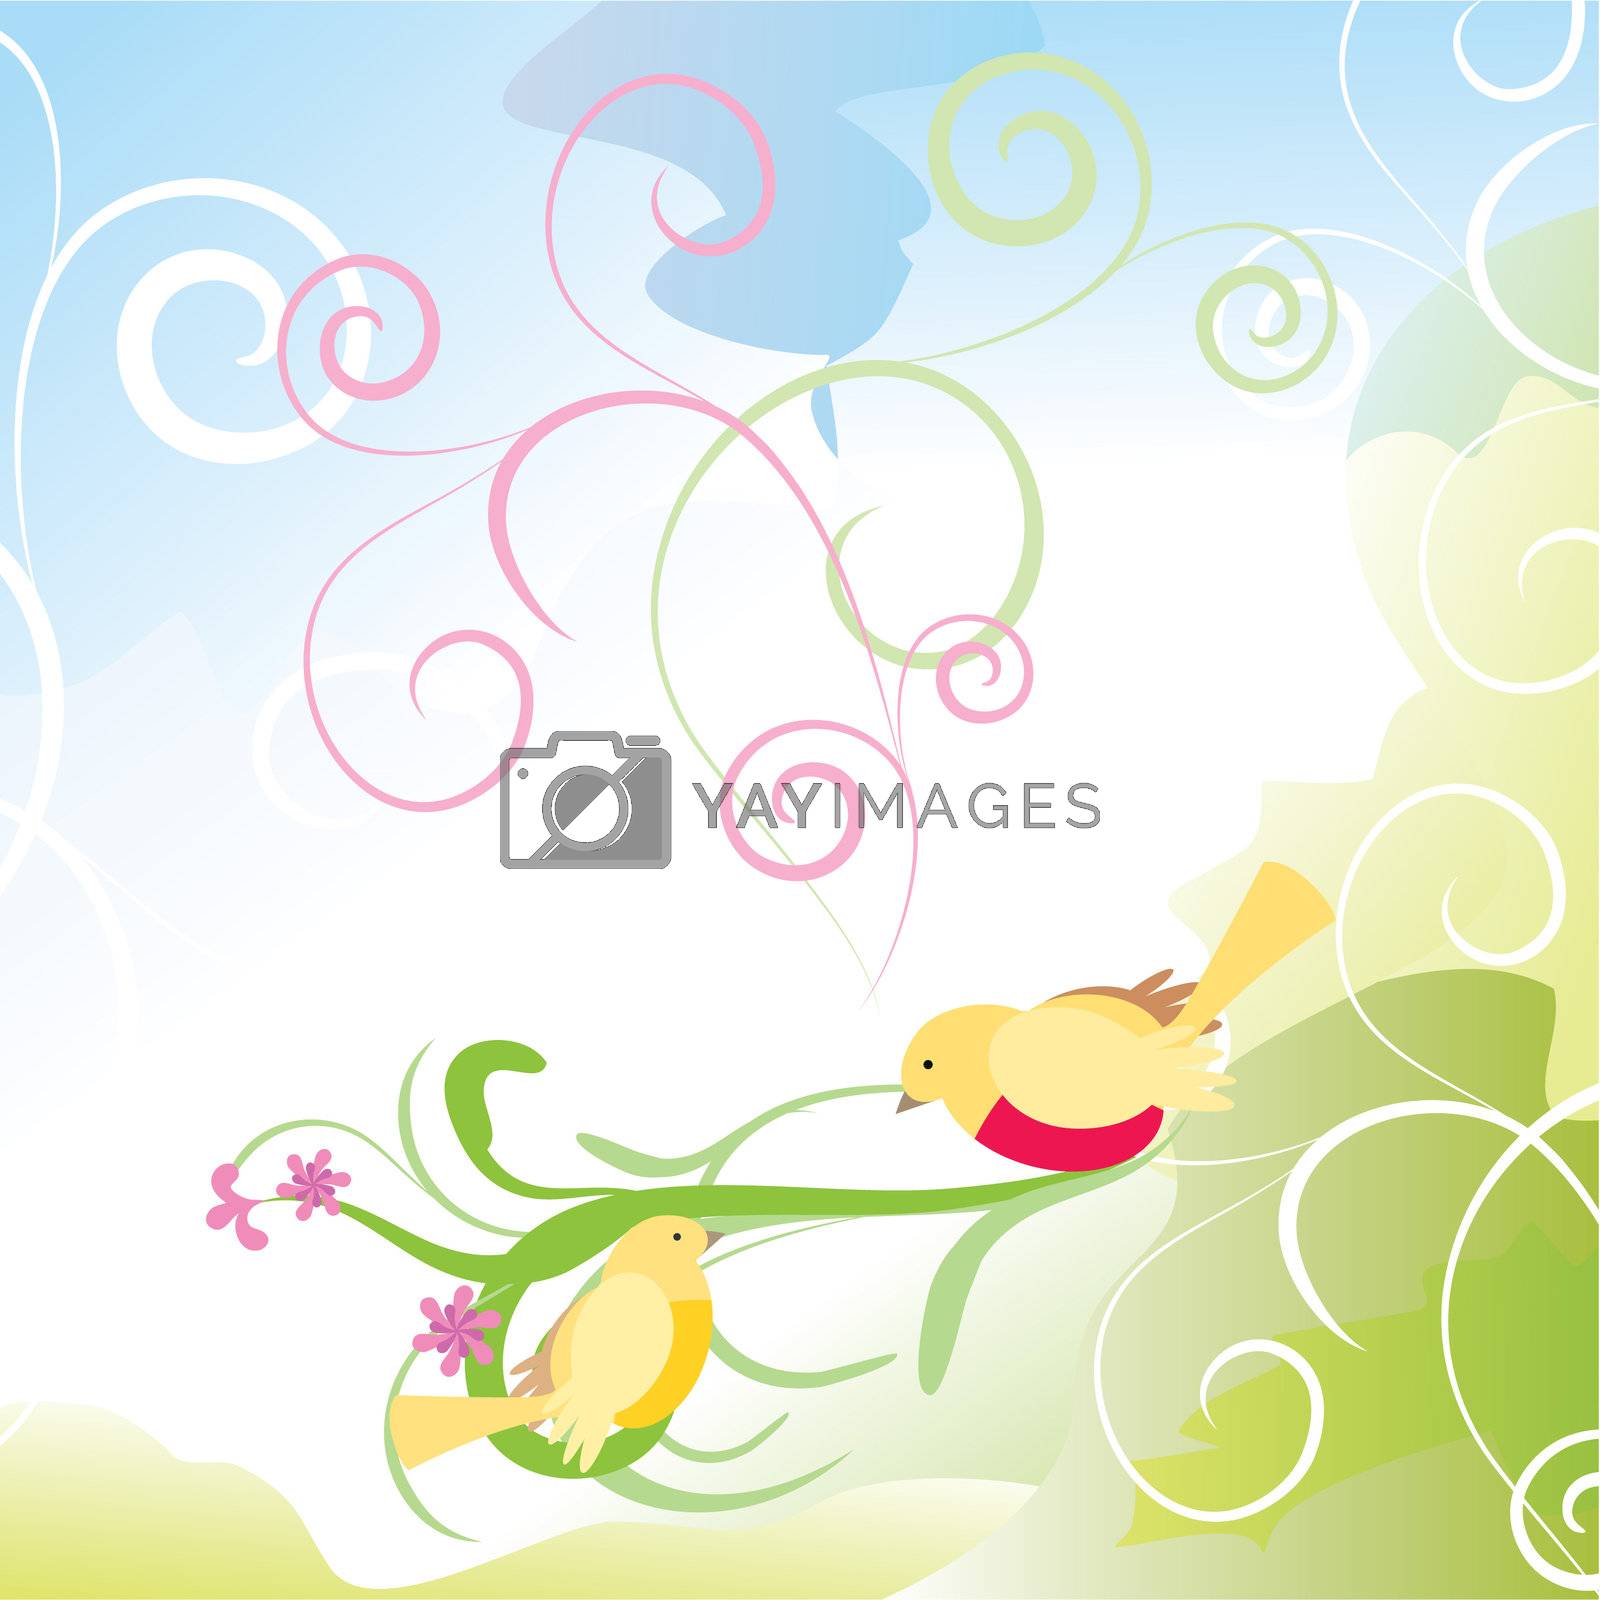 Royalty free image of yellow birds in the garden abstract cartoon curves vector illust by CherJu